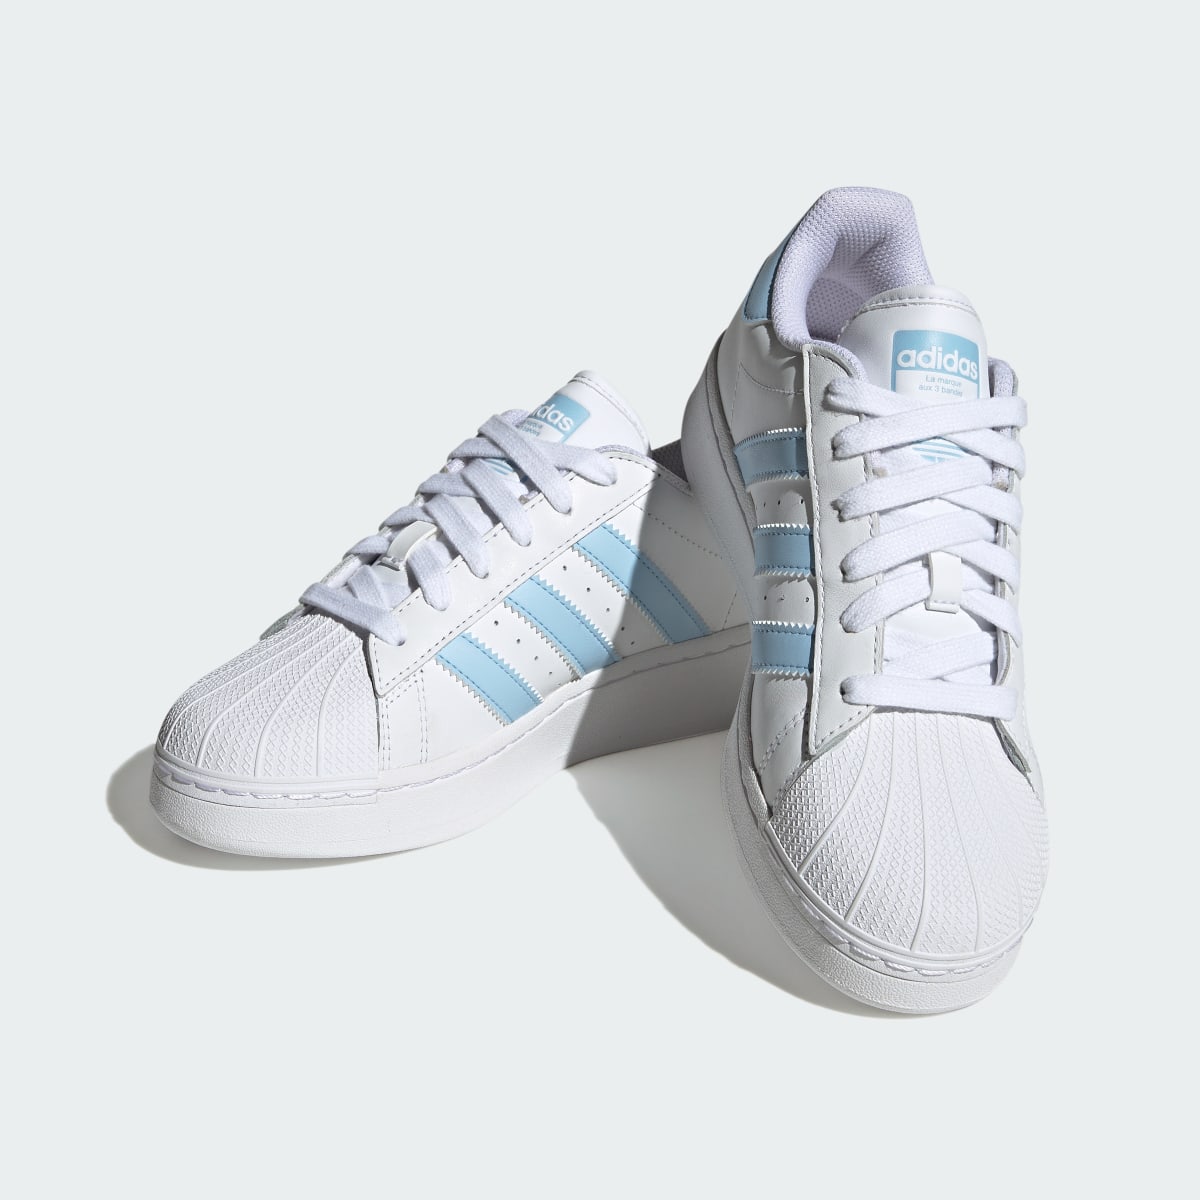 Adidas Superstar XLG Shoes. 5